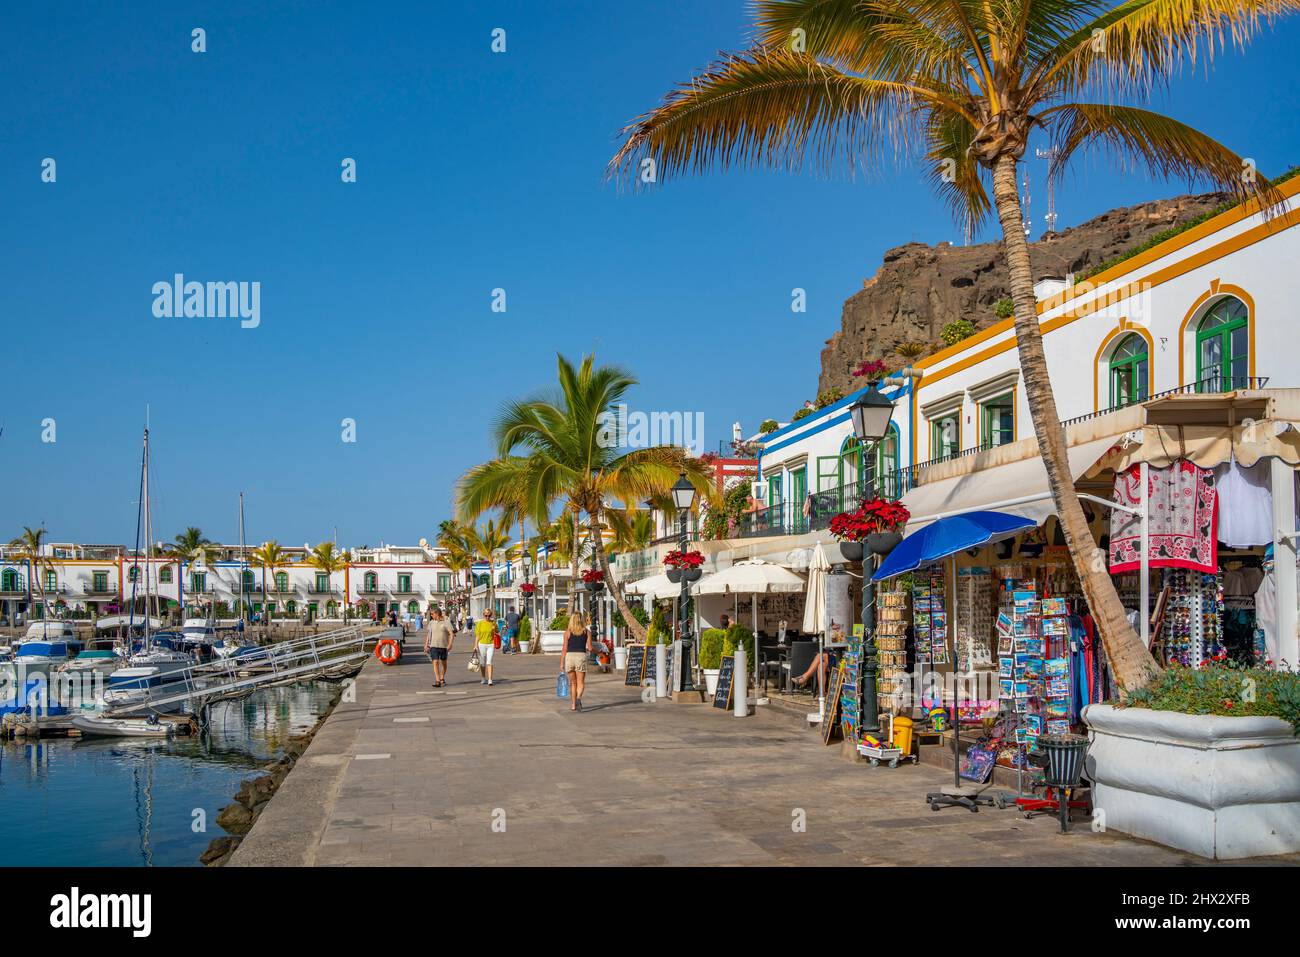 View of boats and colourful buildings along the promenade in the old town, Puerto de Mogan, Gran Canaria, Canary Islands, Spain, Europe Stock Photo